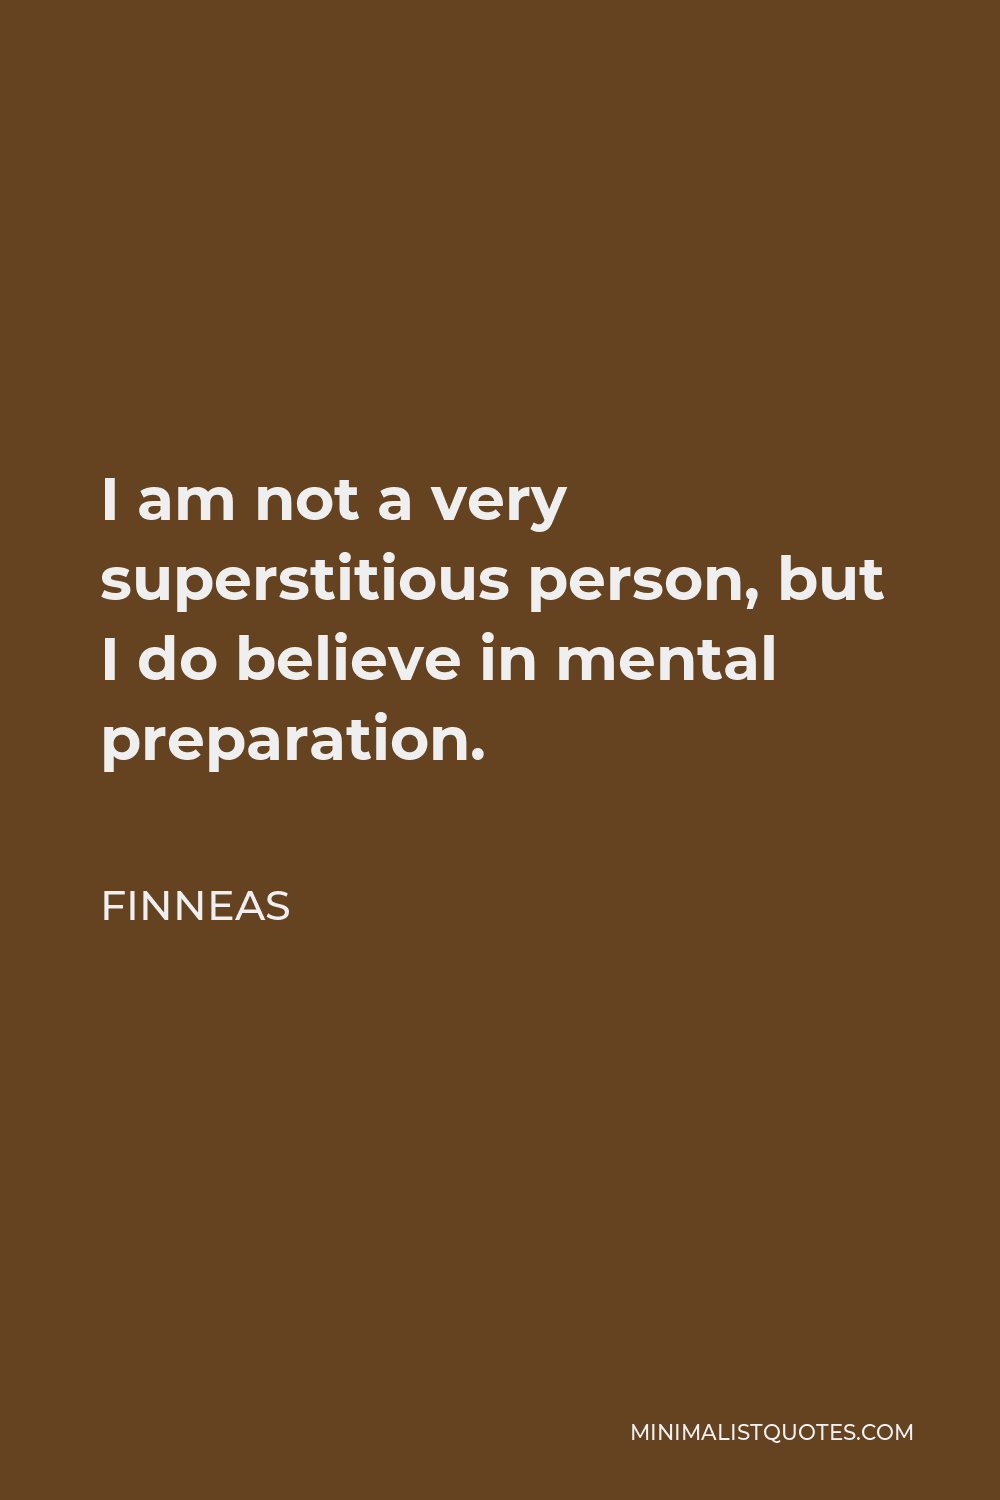 Finneas Quote - I am not a very superstitious person, but I do believe in mental preparation.